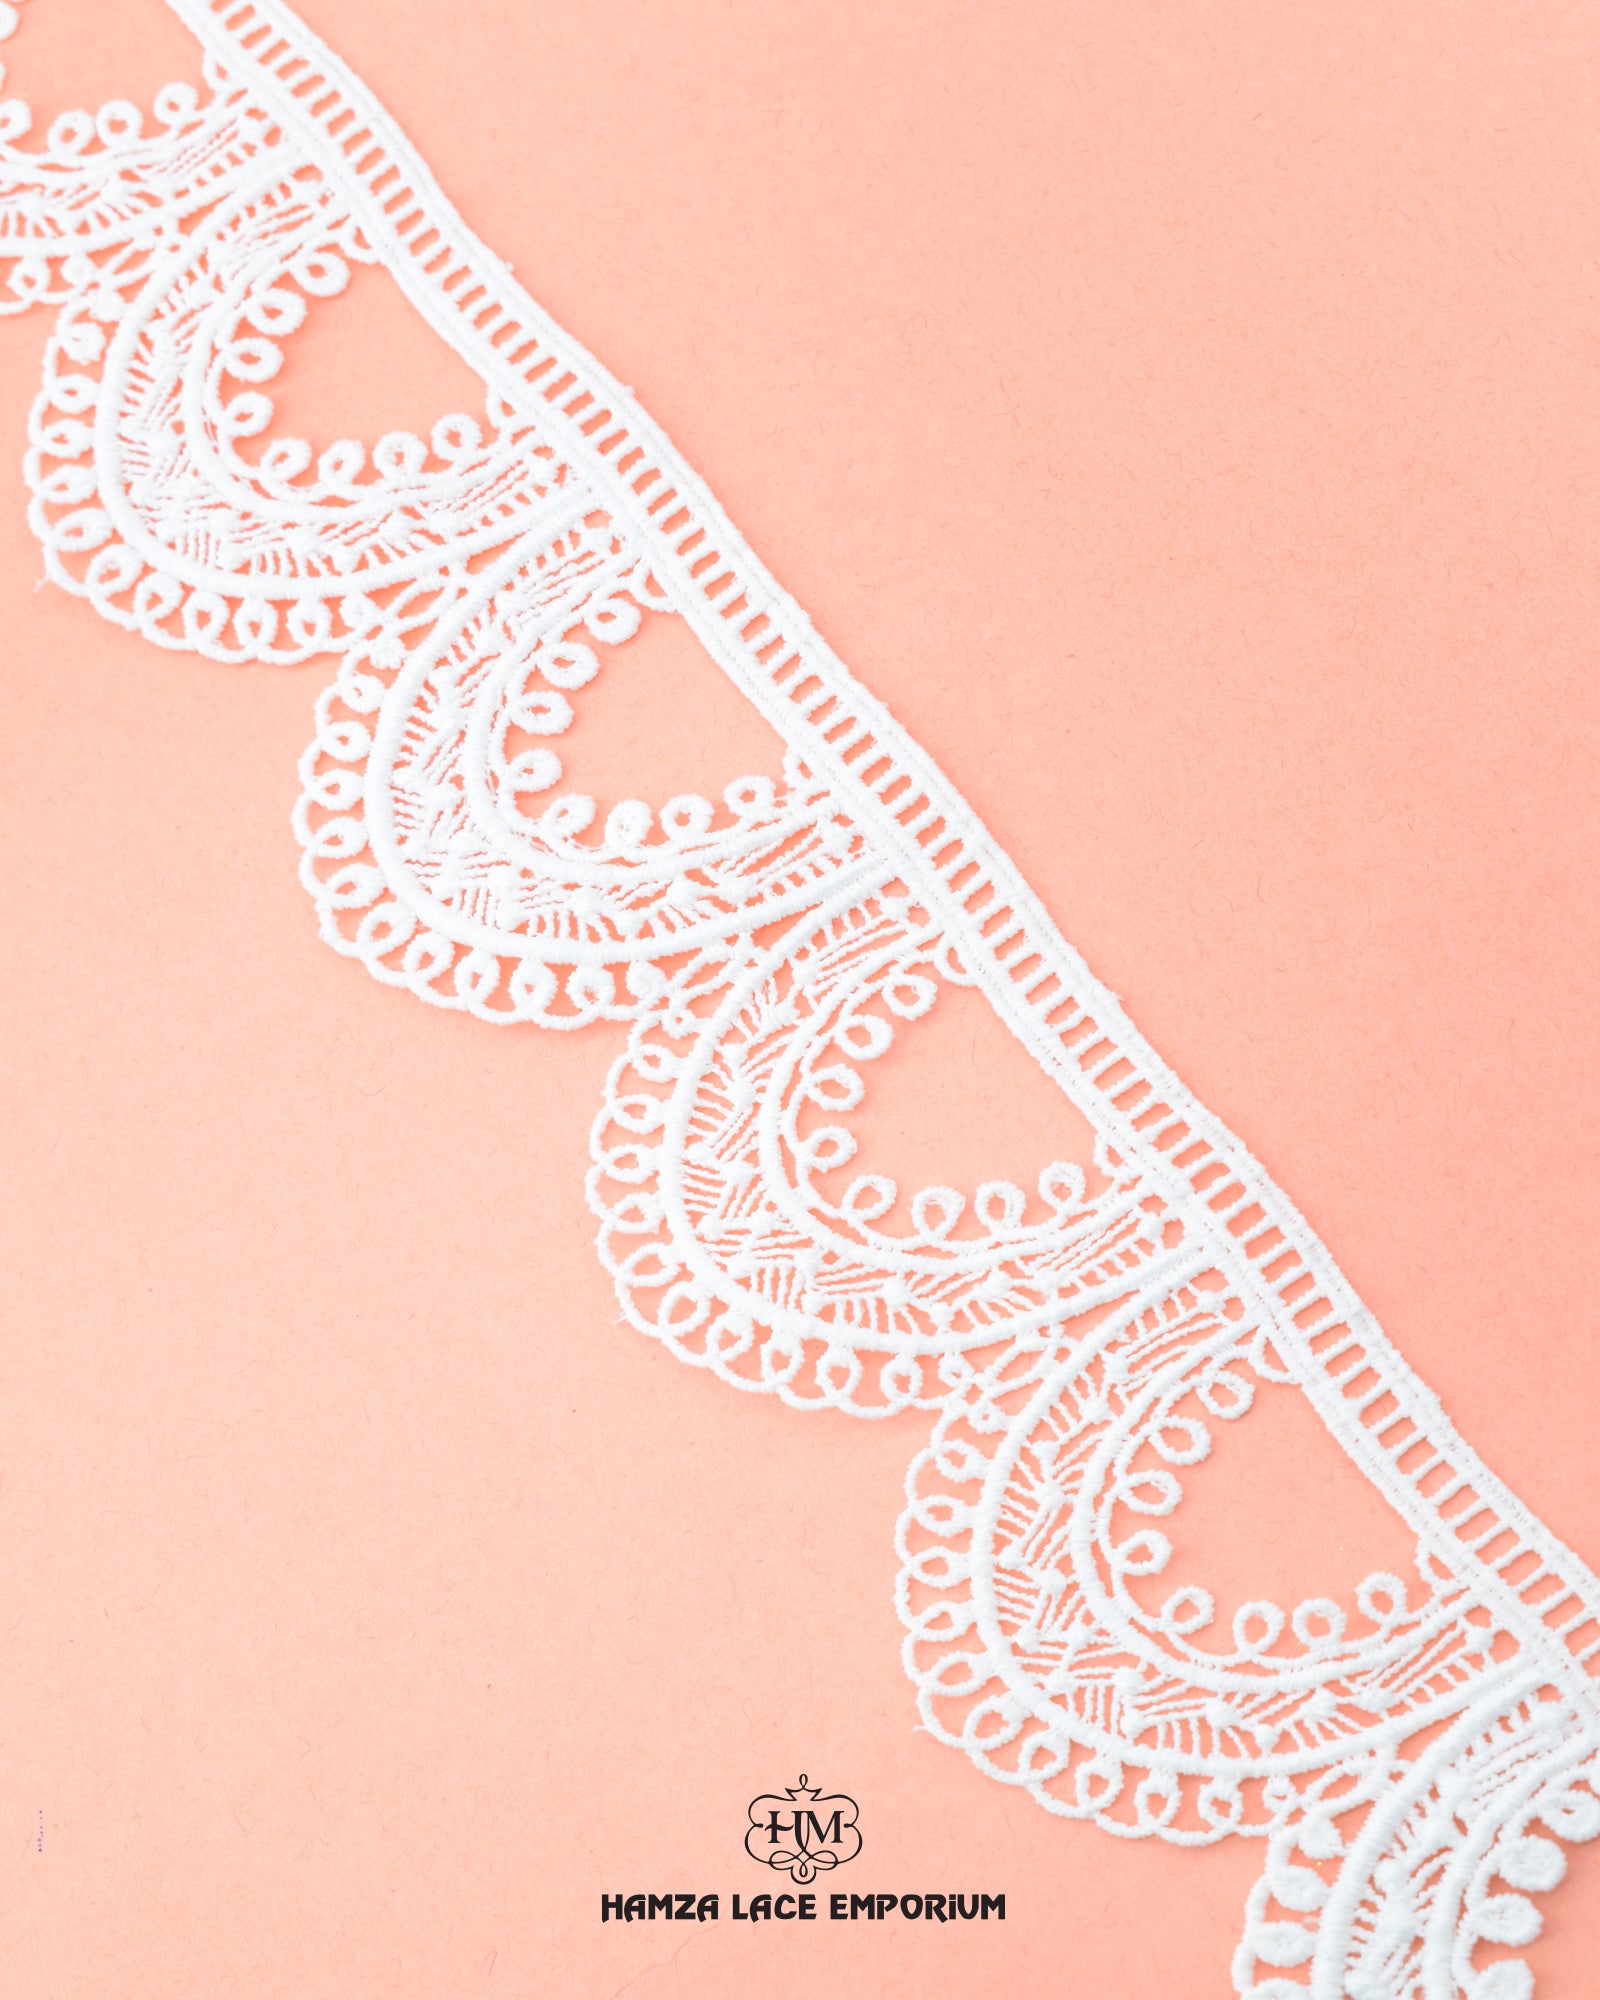 The Edging Loop Lace 8011 with the brand name 'Hamza Lace' and logo